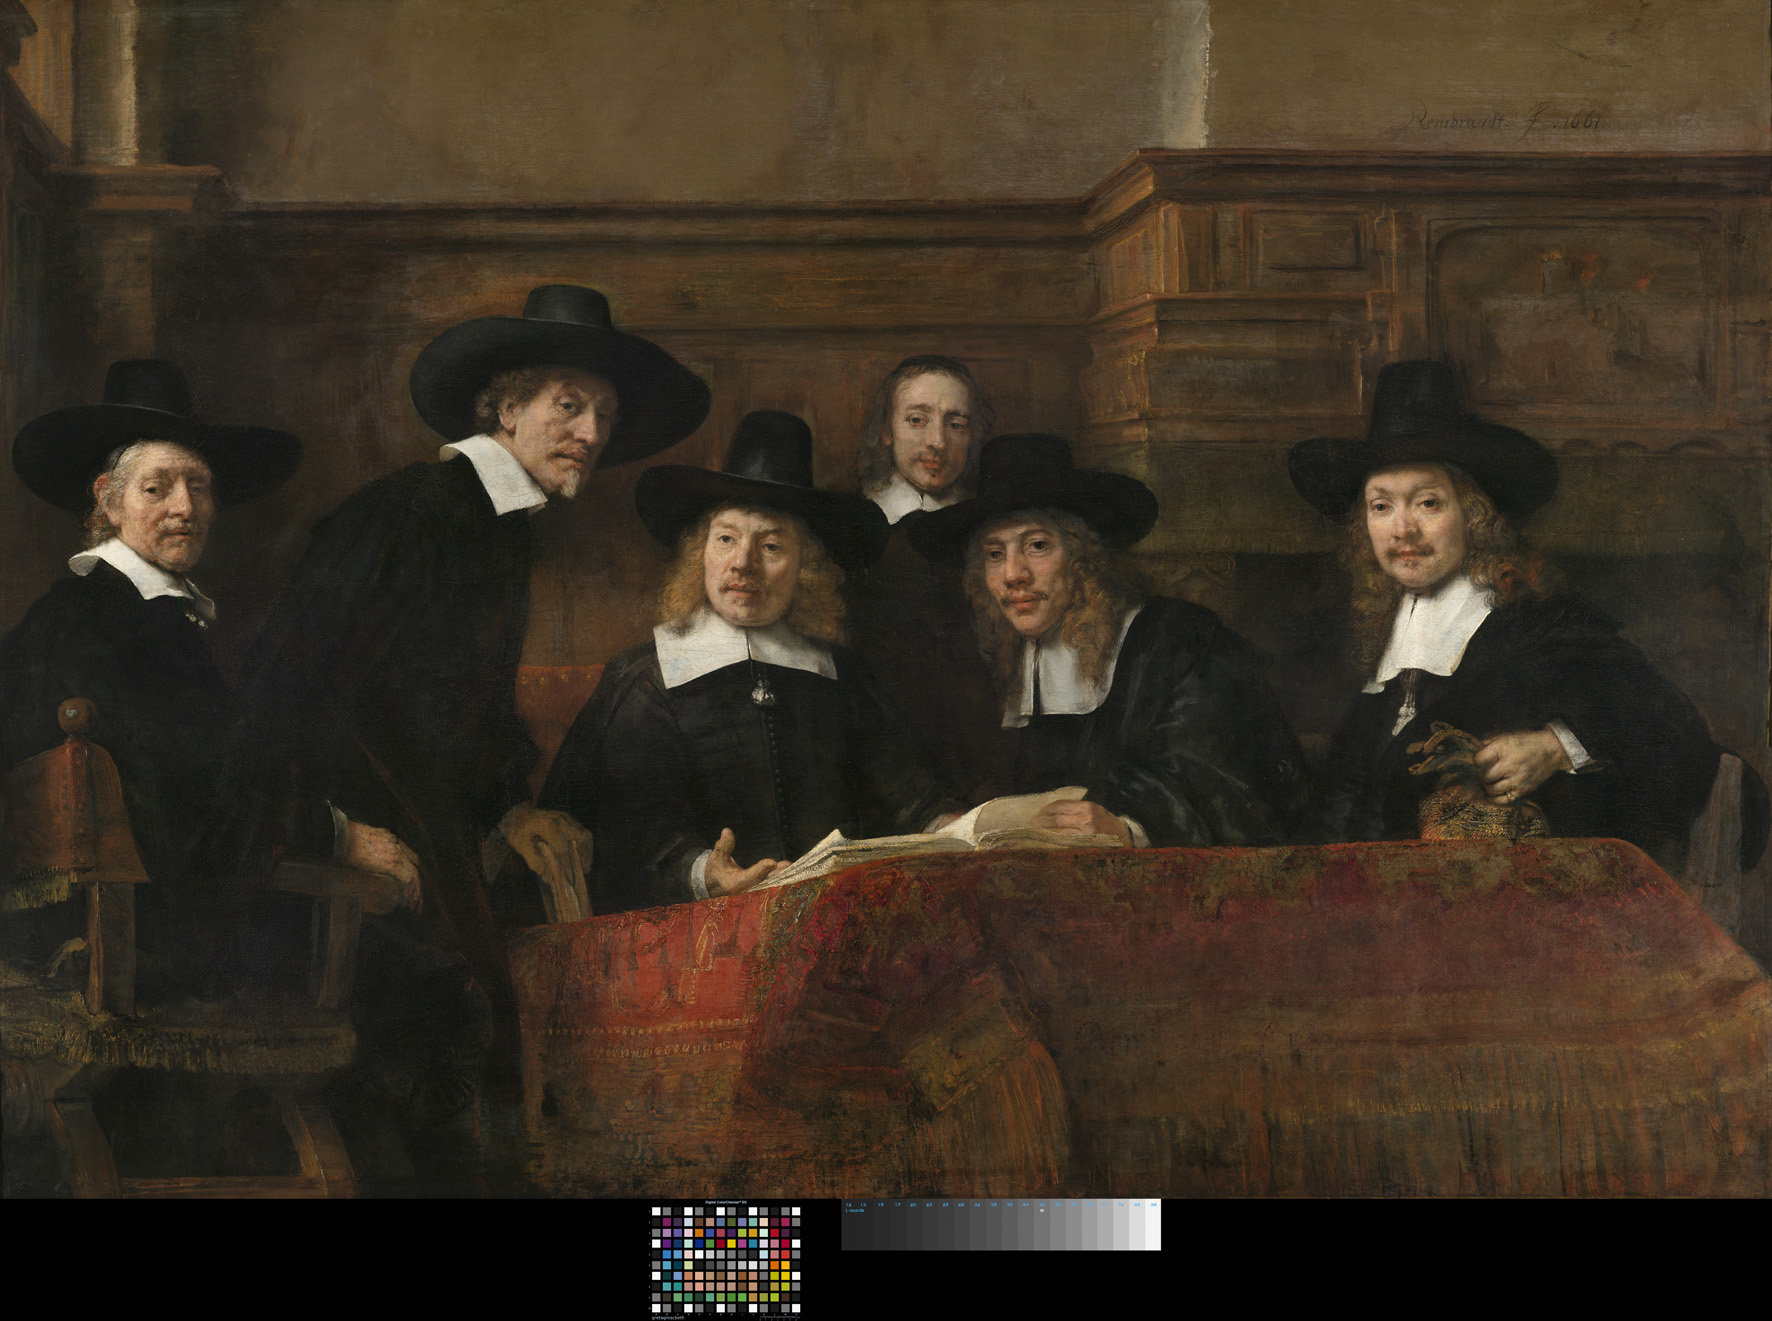 X7909
Rembrandt
The Sampling Officials of the Amsterdam Drapers’ Guild, known as ‘The Syndics’, about 1662
Oil on canvas
191.5 x 279 cm
Rijksmuseum, on loan from the City of Amsterdam
© Rijksmuseum, Amsterdam (SK-C-6)
